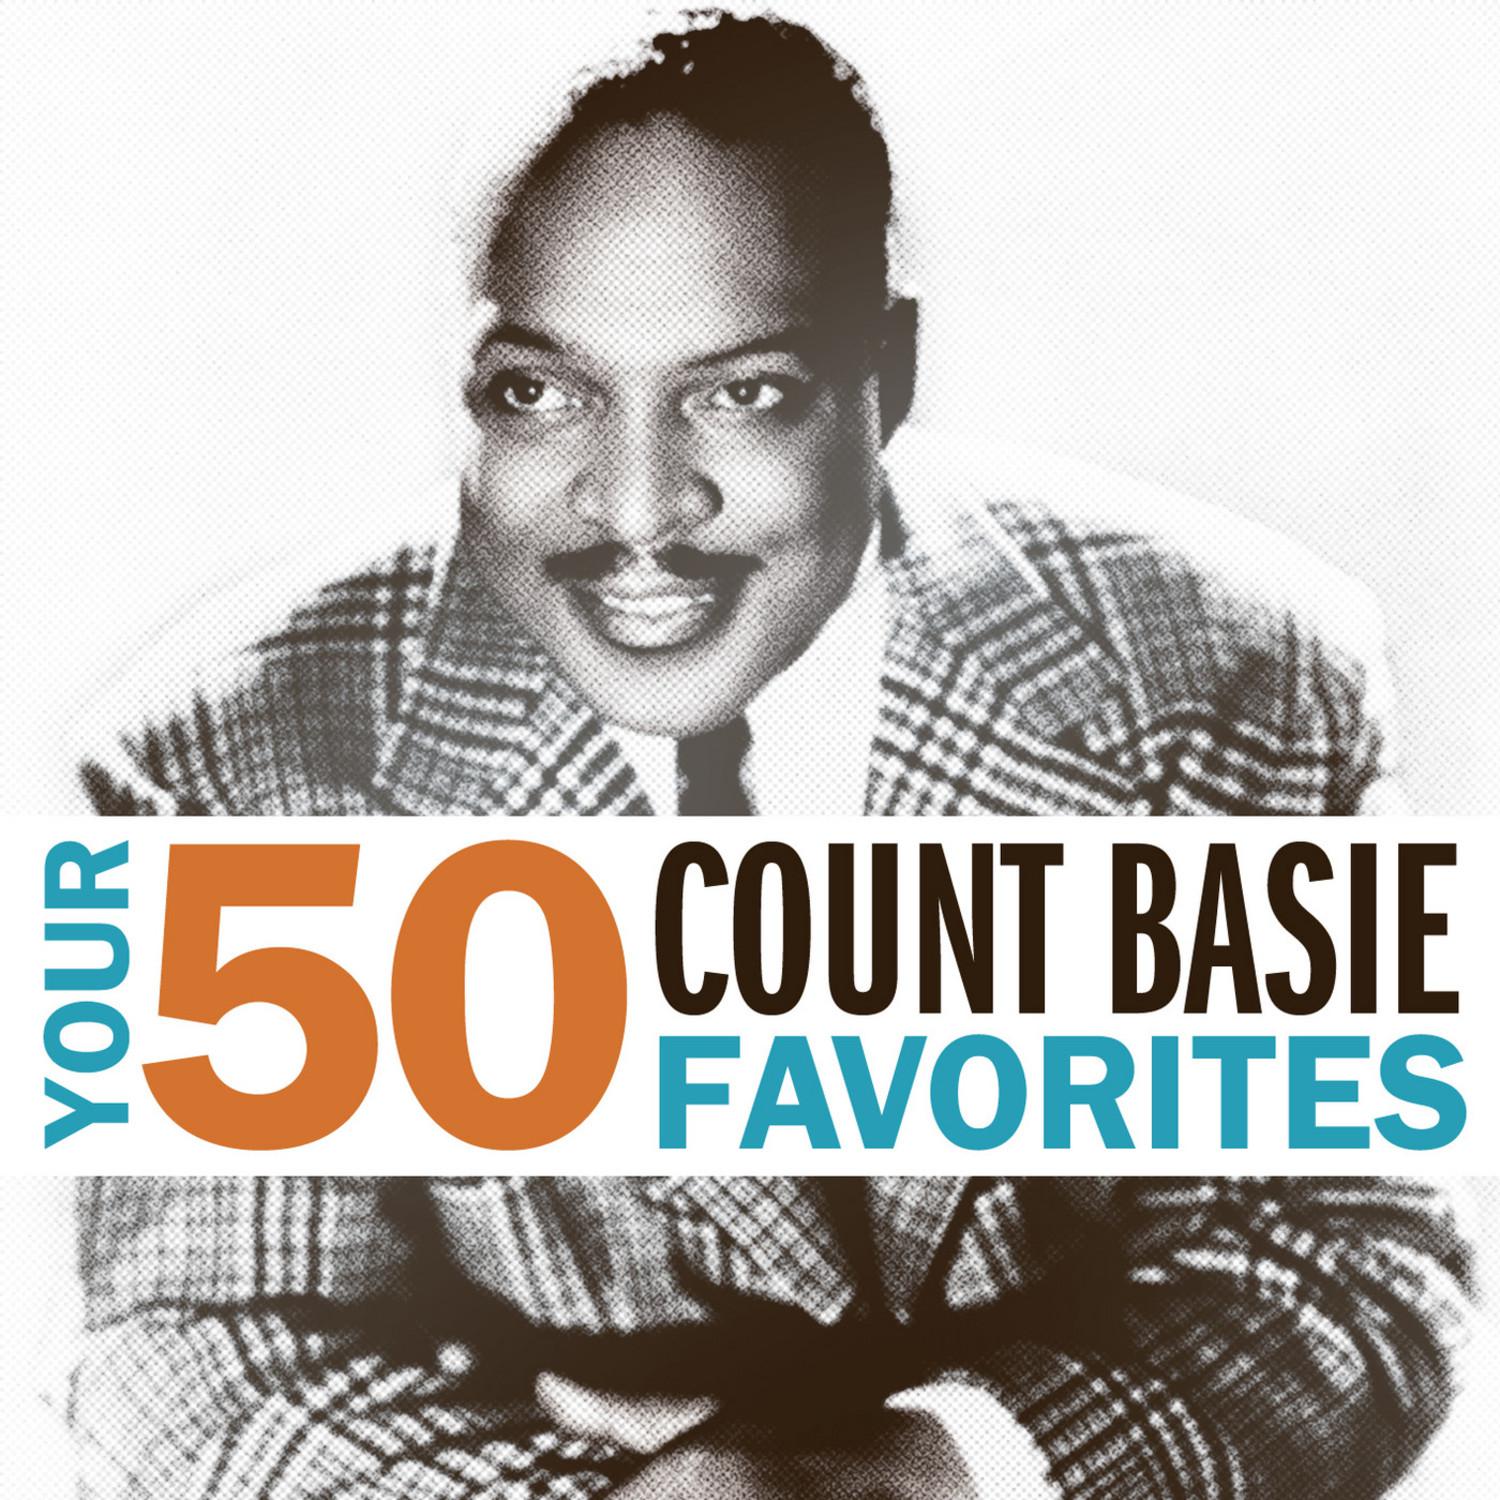 Your 50 Count Basie Favorites